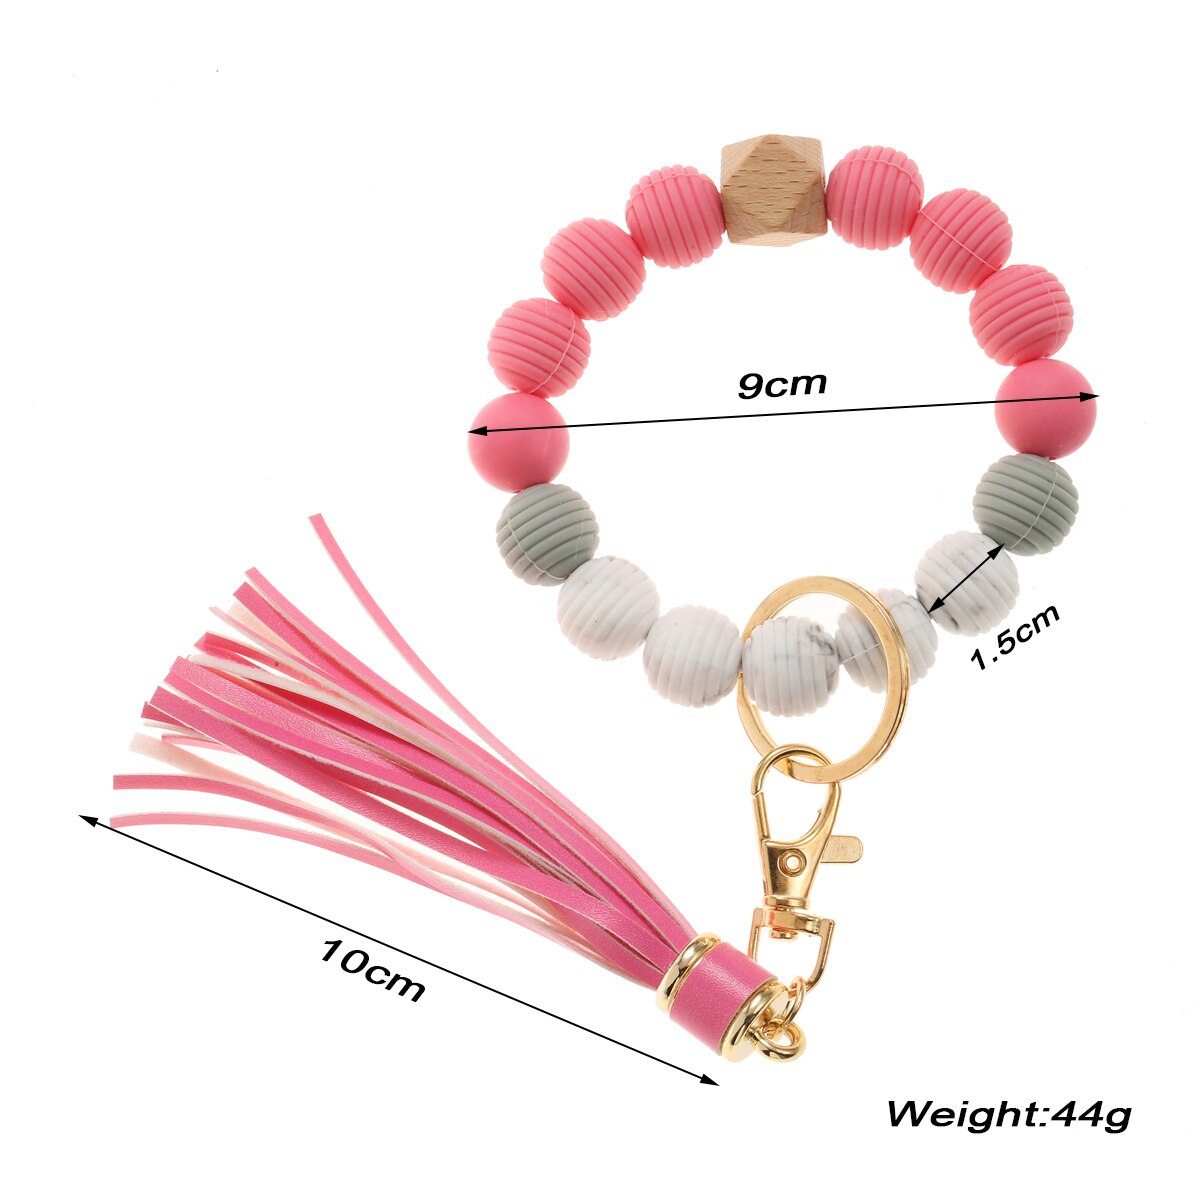 Silicone Key Ring Bracelet Wristlet Keychain Unique Beaded Bangle Key Chains for Women with Leather Tassel